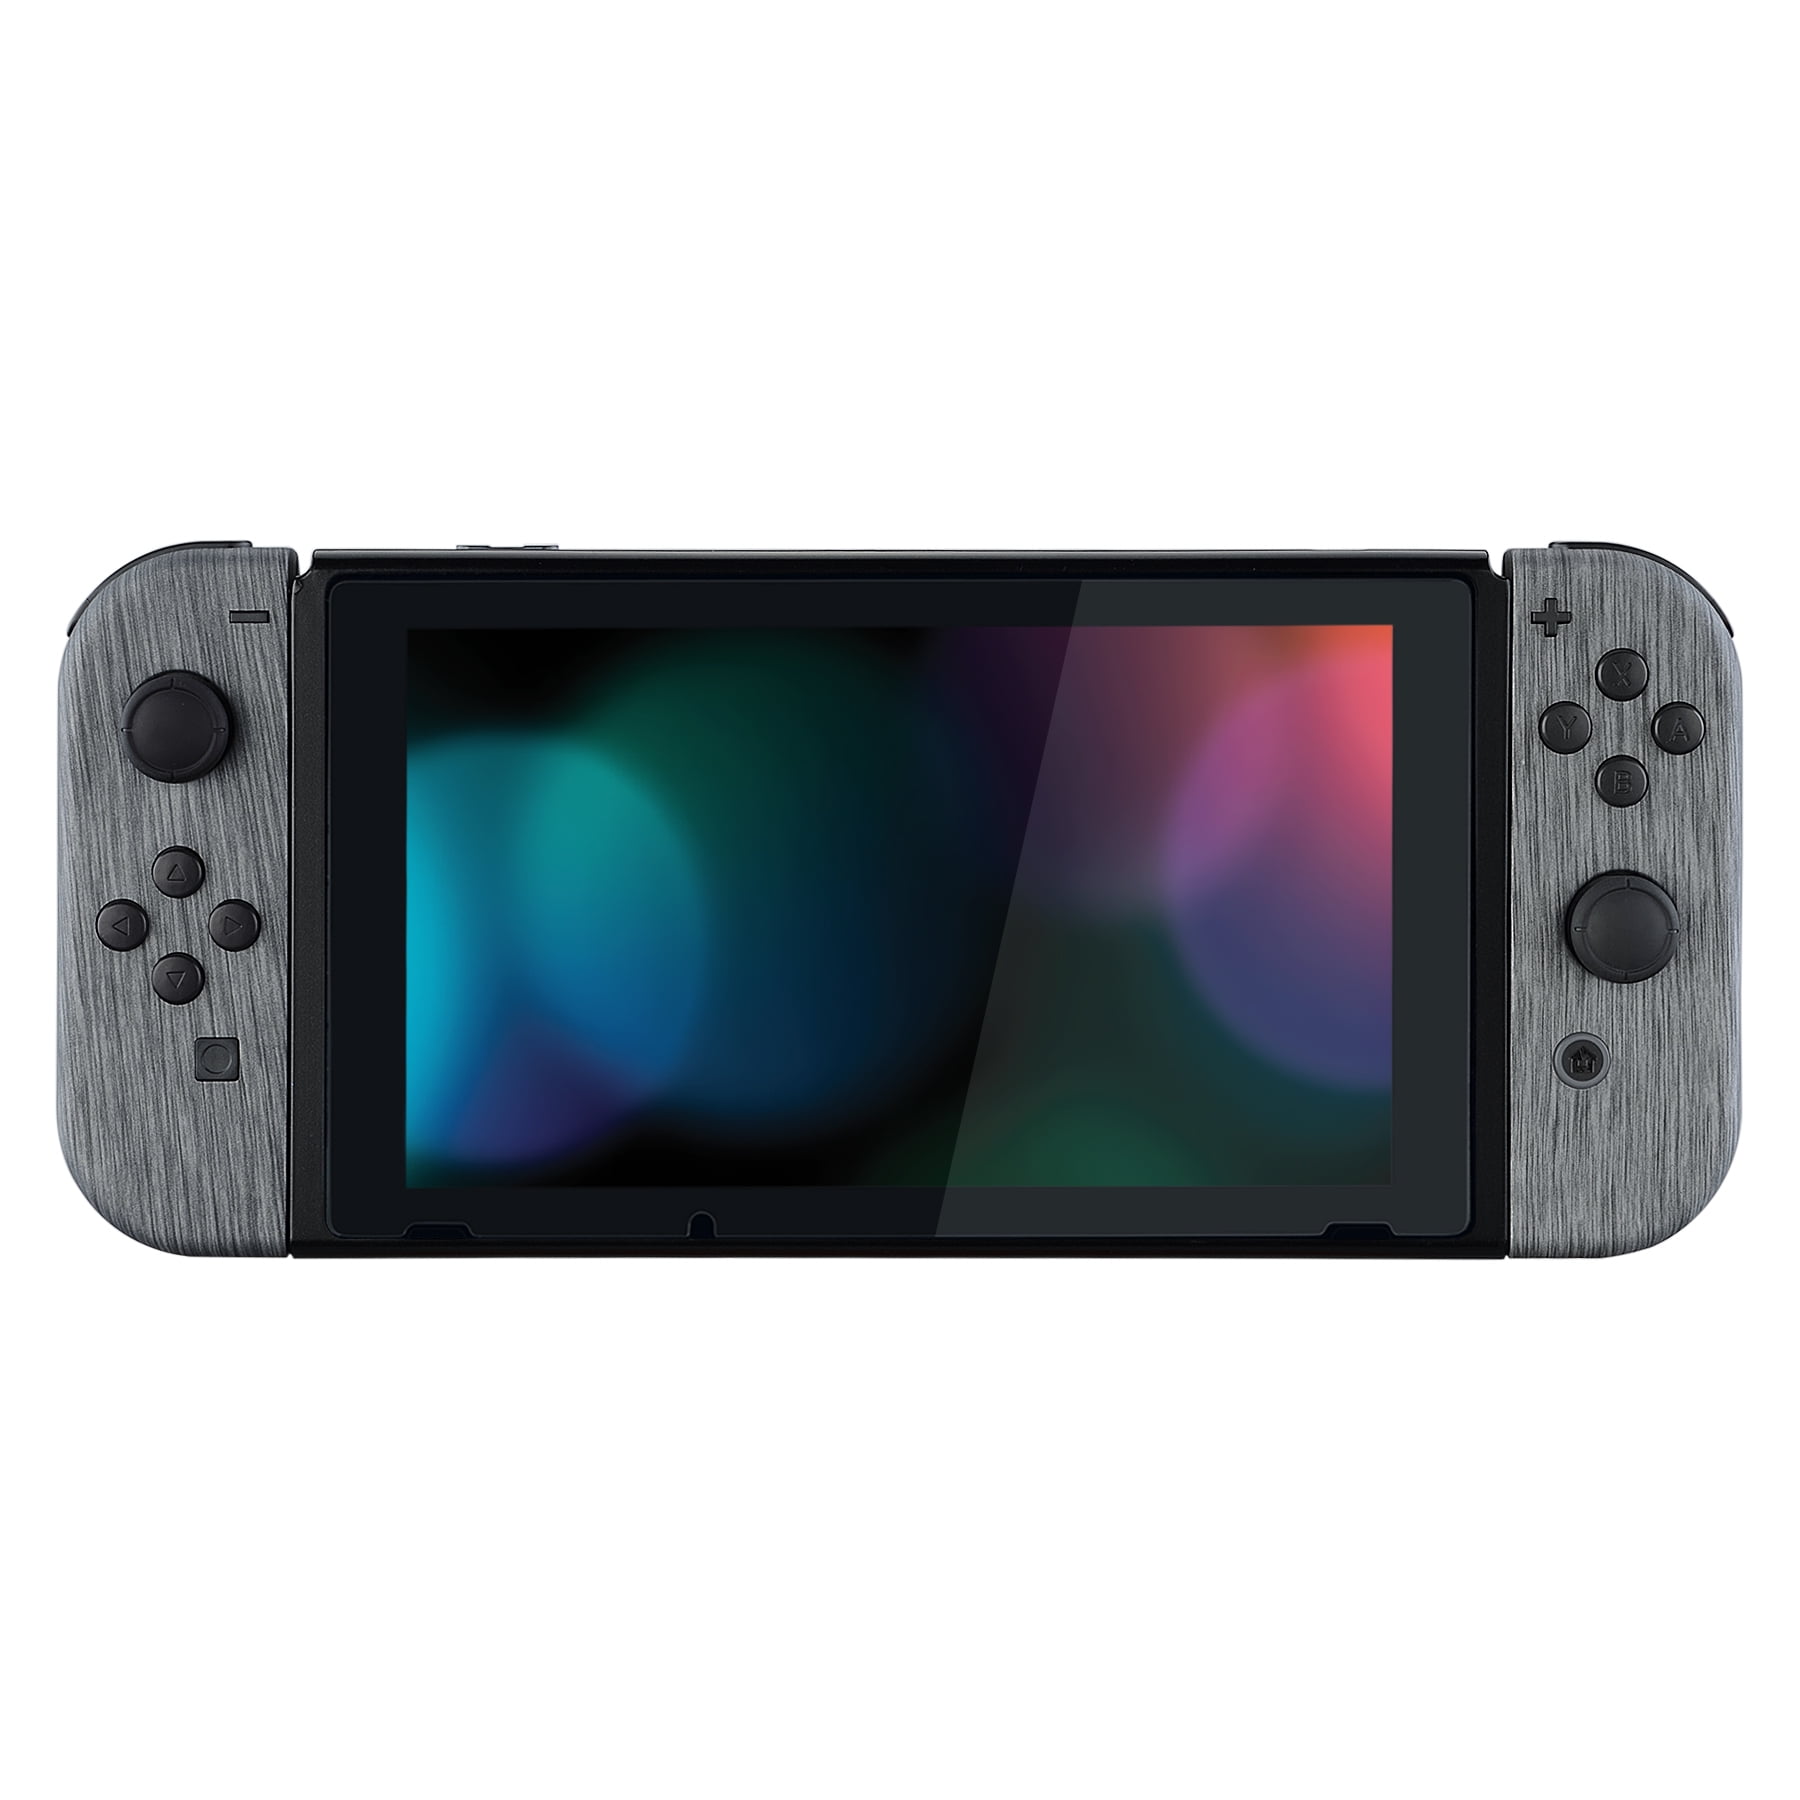 eXtremeRate Cosmic Pink Gold Marble Effect Joycon Handheld 